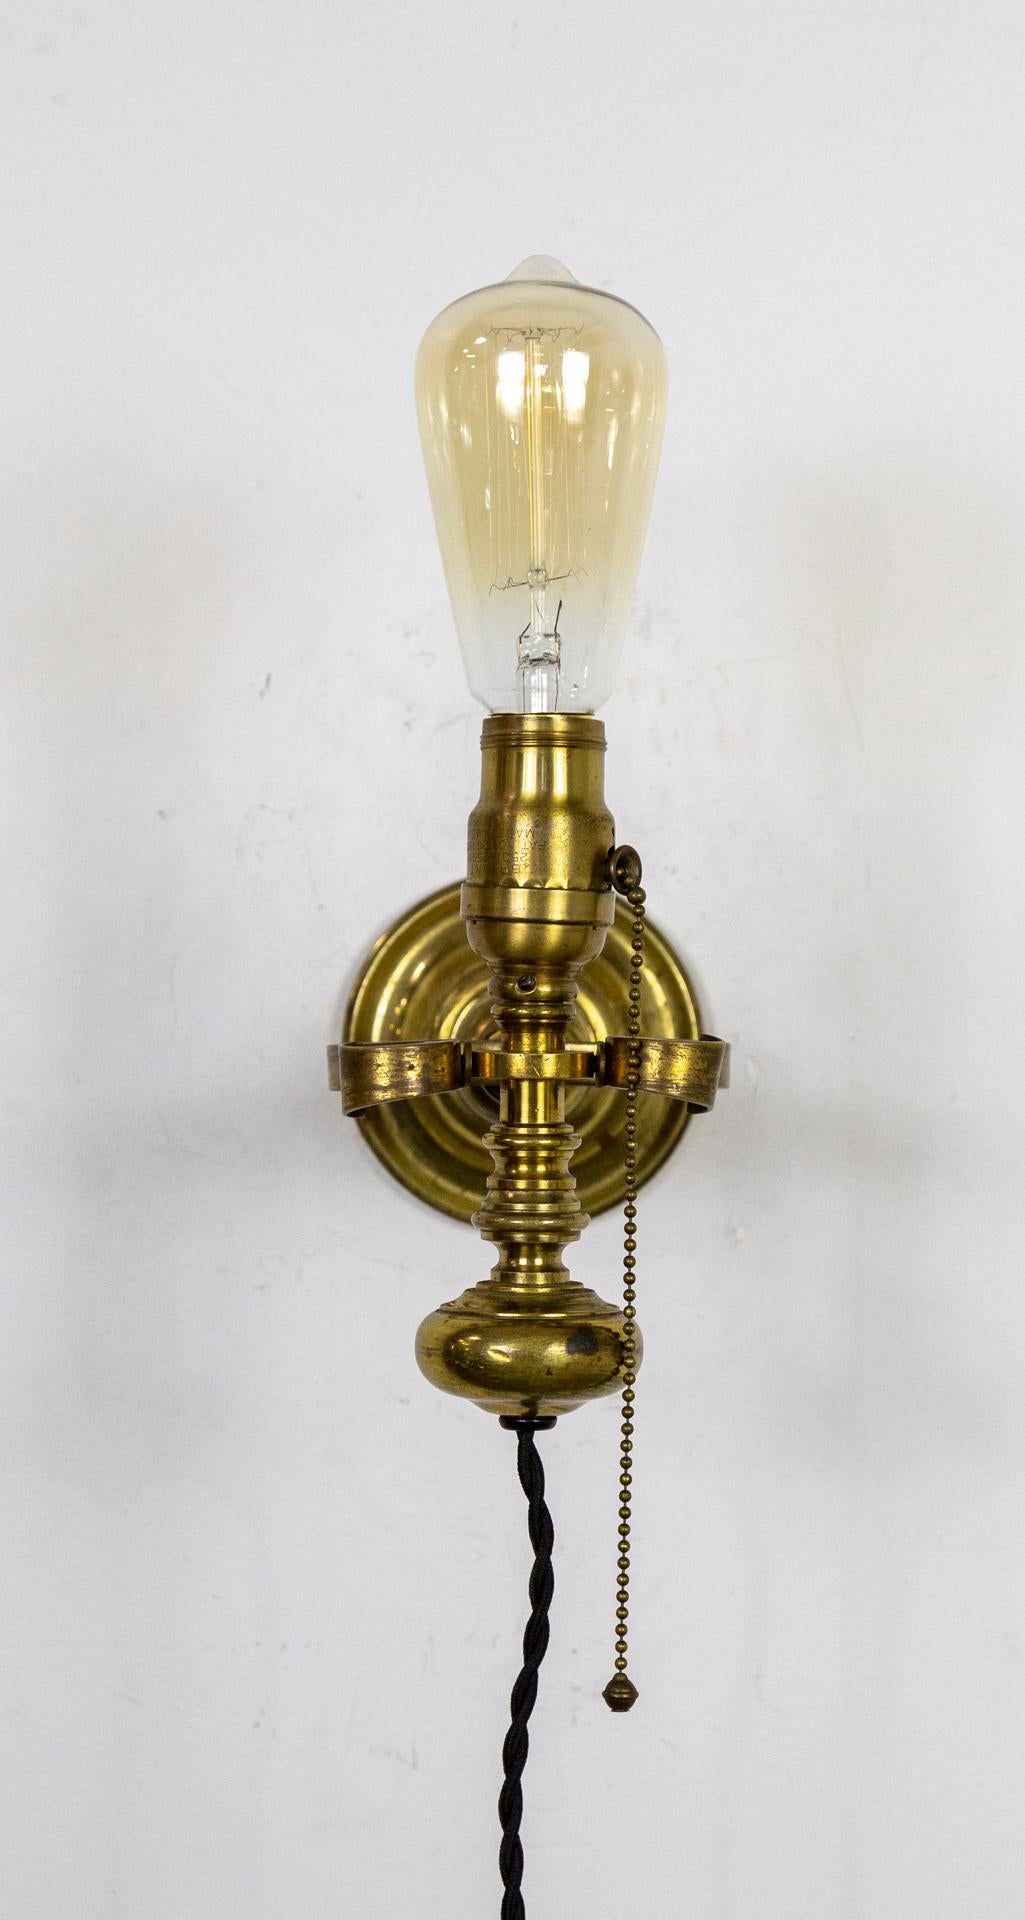 A nautical, candlestick style wall lamp made to rock on a ship and stay upright. An interesting piece of history from the late 19th century. It looks great as a table lamp too. Newly wired with a fabric covered, rope cord; pull chain switch. Medium